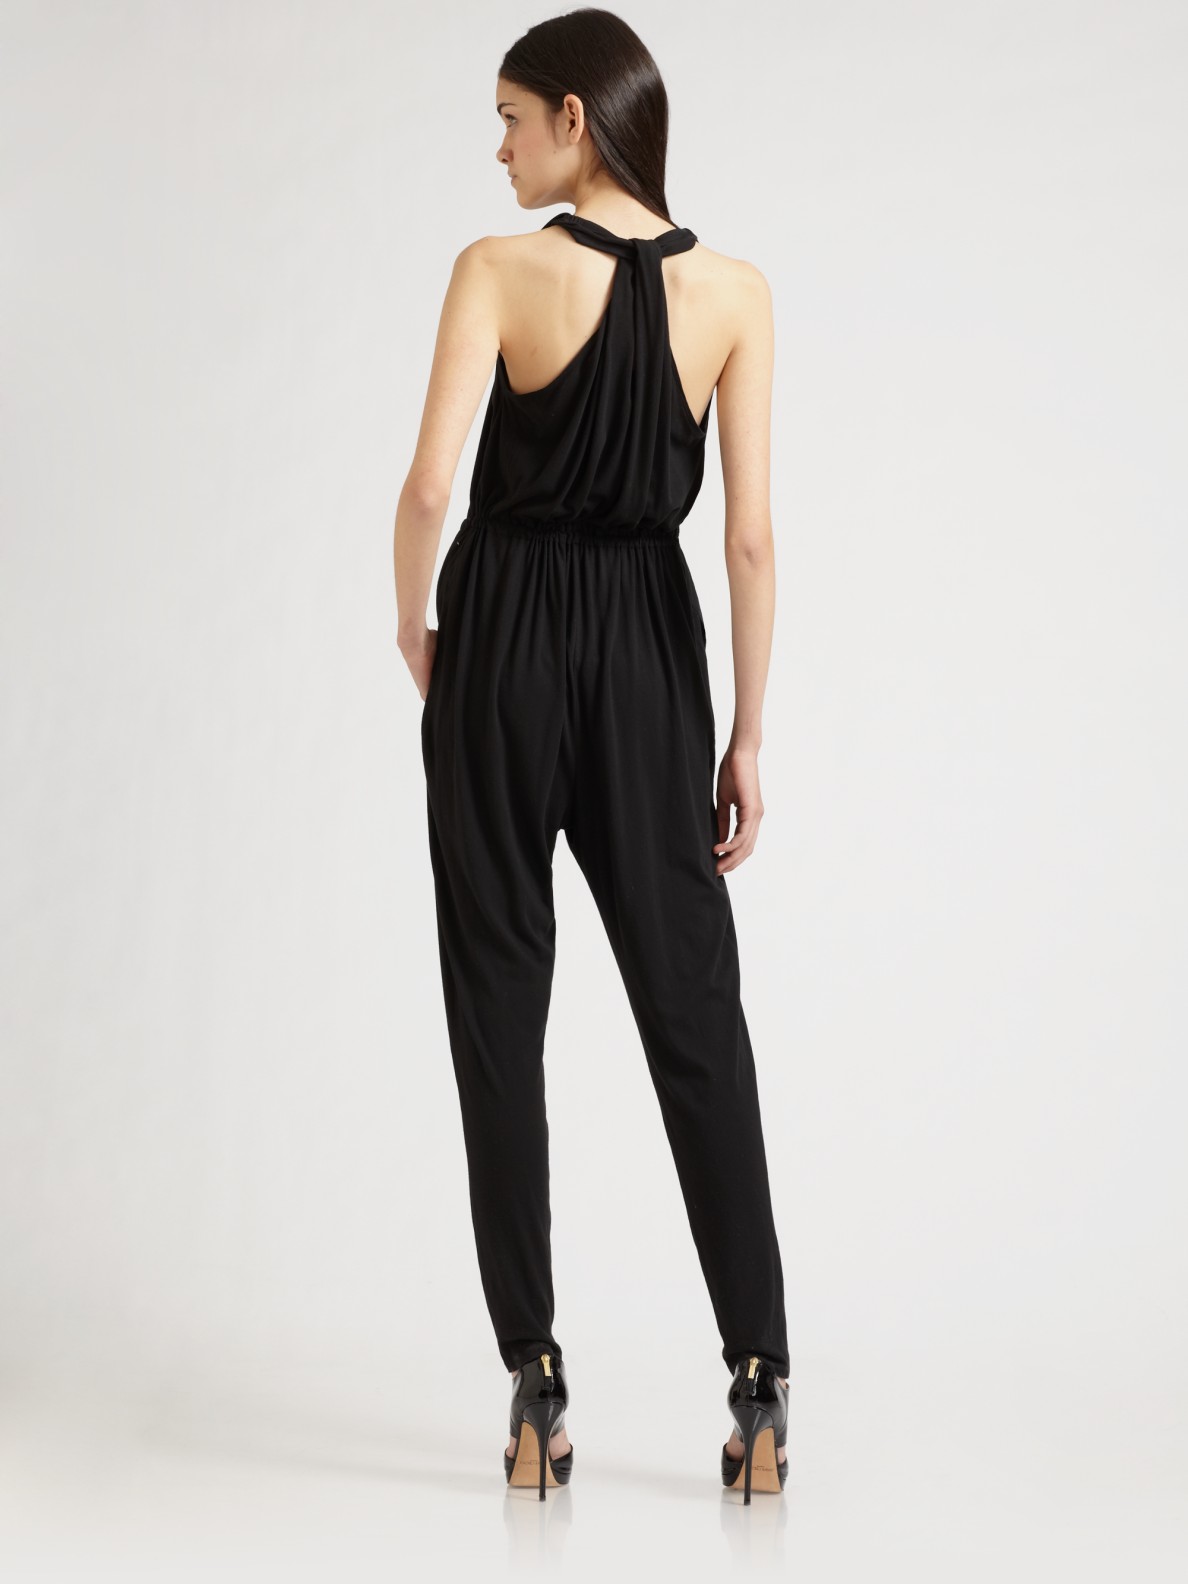 Lyst - Theory Garvie Cotton-modal Jumpsuit in Black